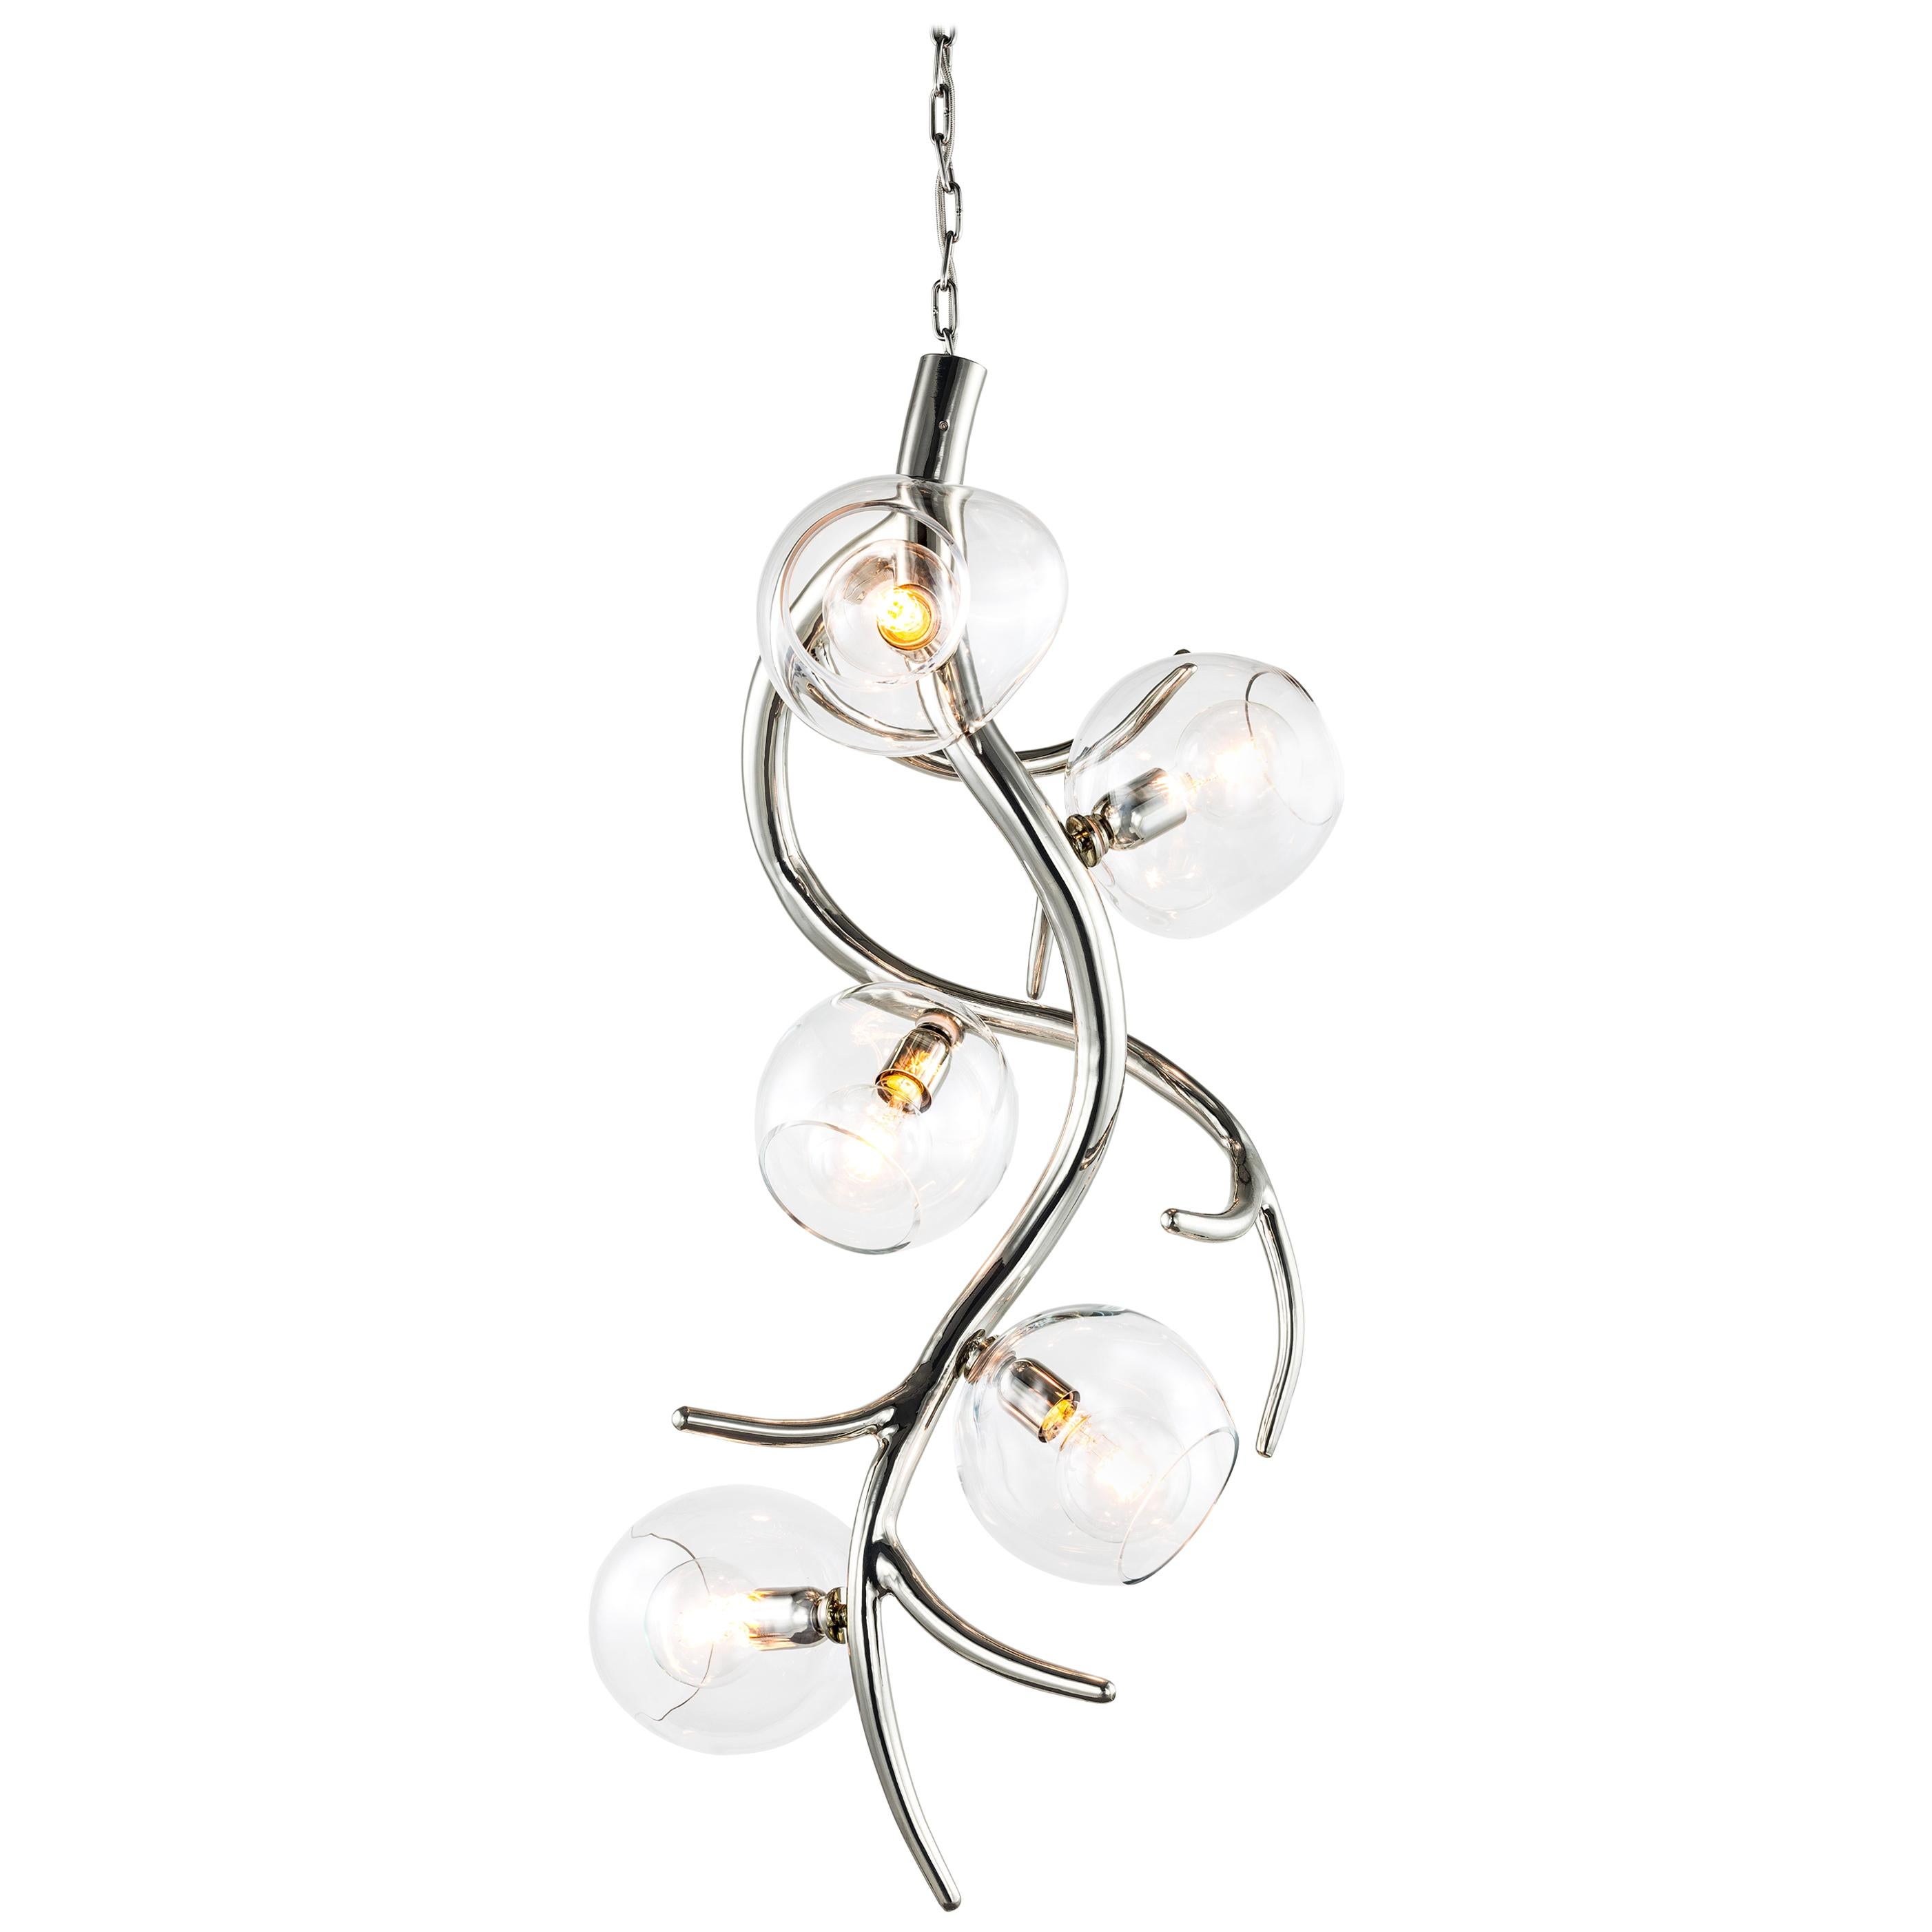 Modern Pendant with Colored Glass in a Nickel Finish, Ersa Collection, by Brand